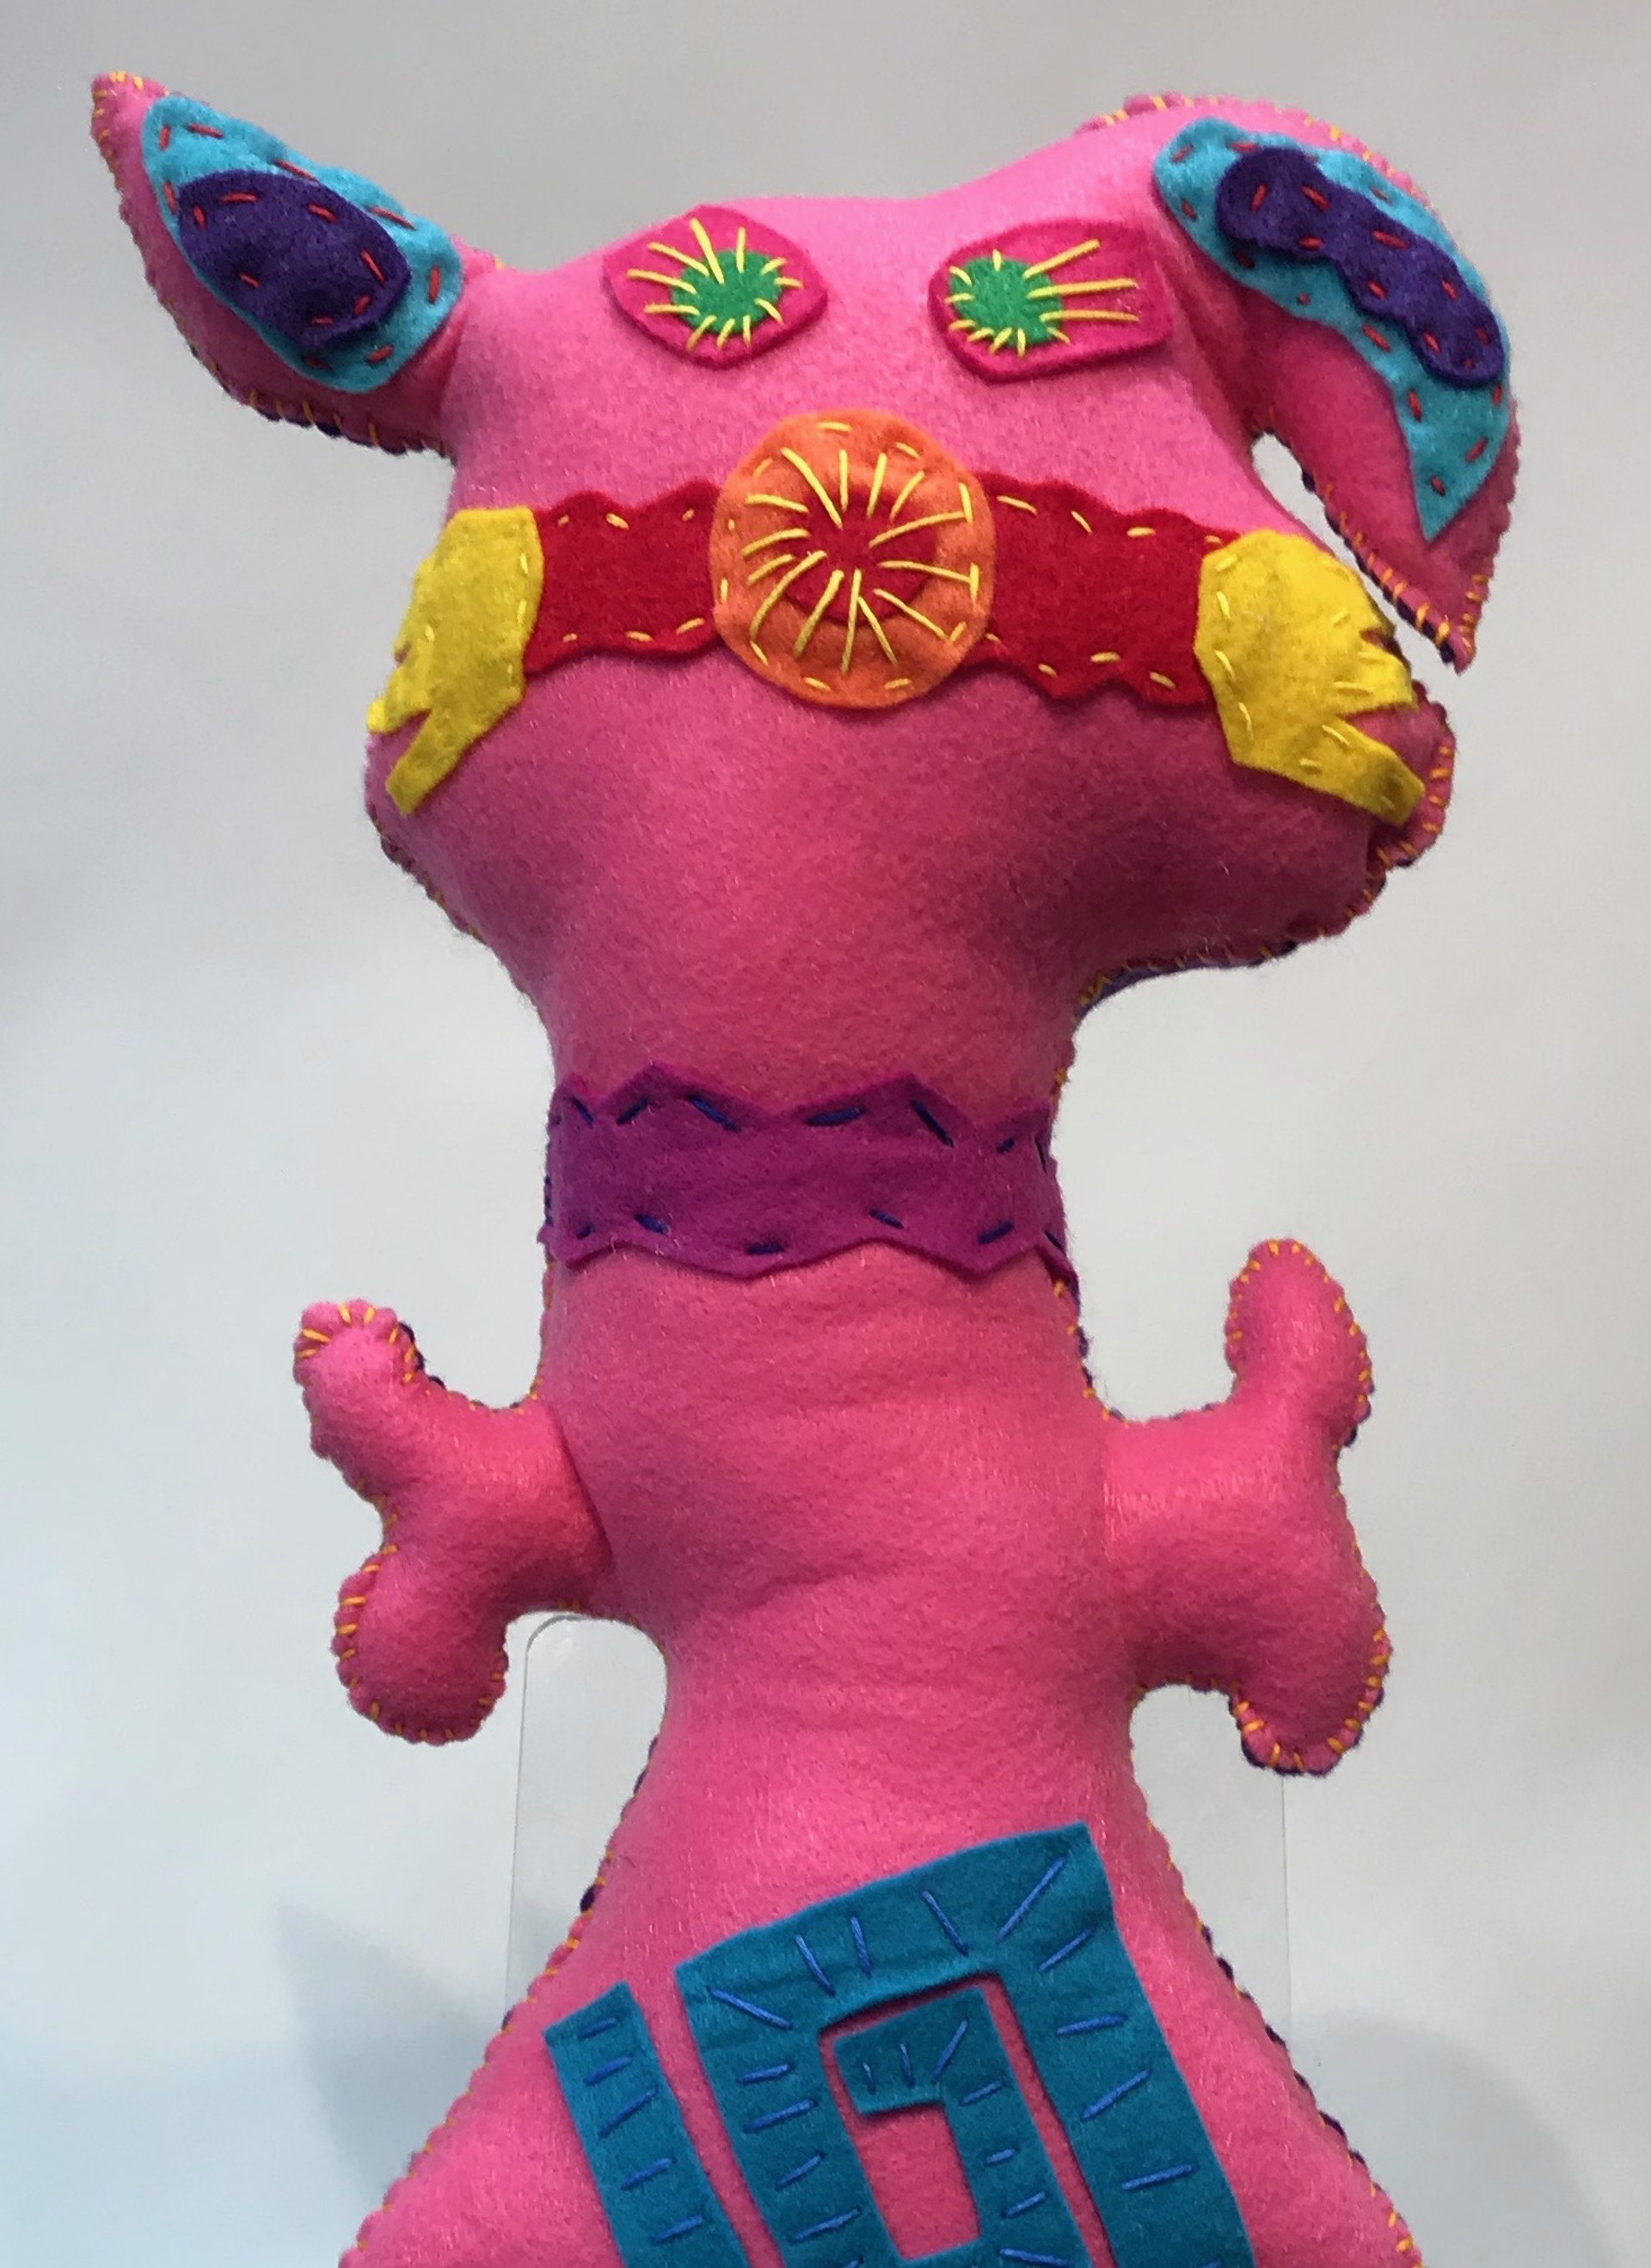 Free Range Critter Pink and Purple Pig by Kerry Green